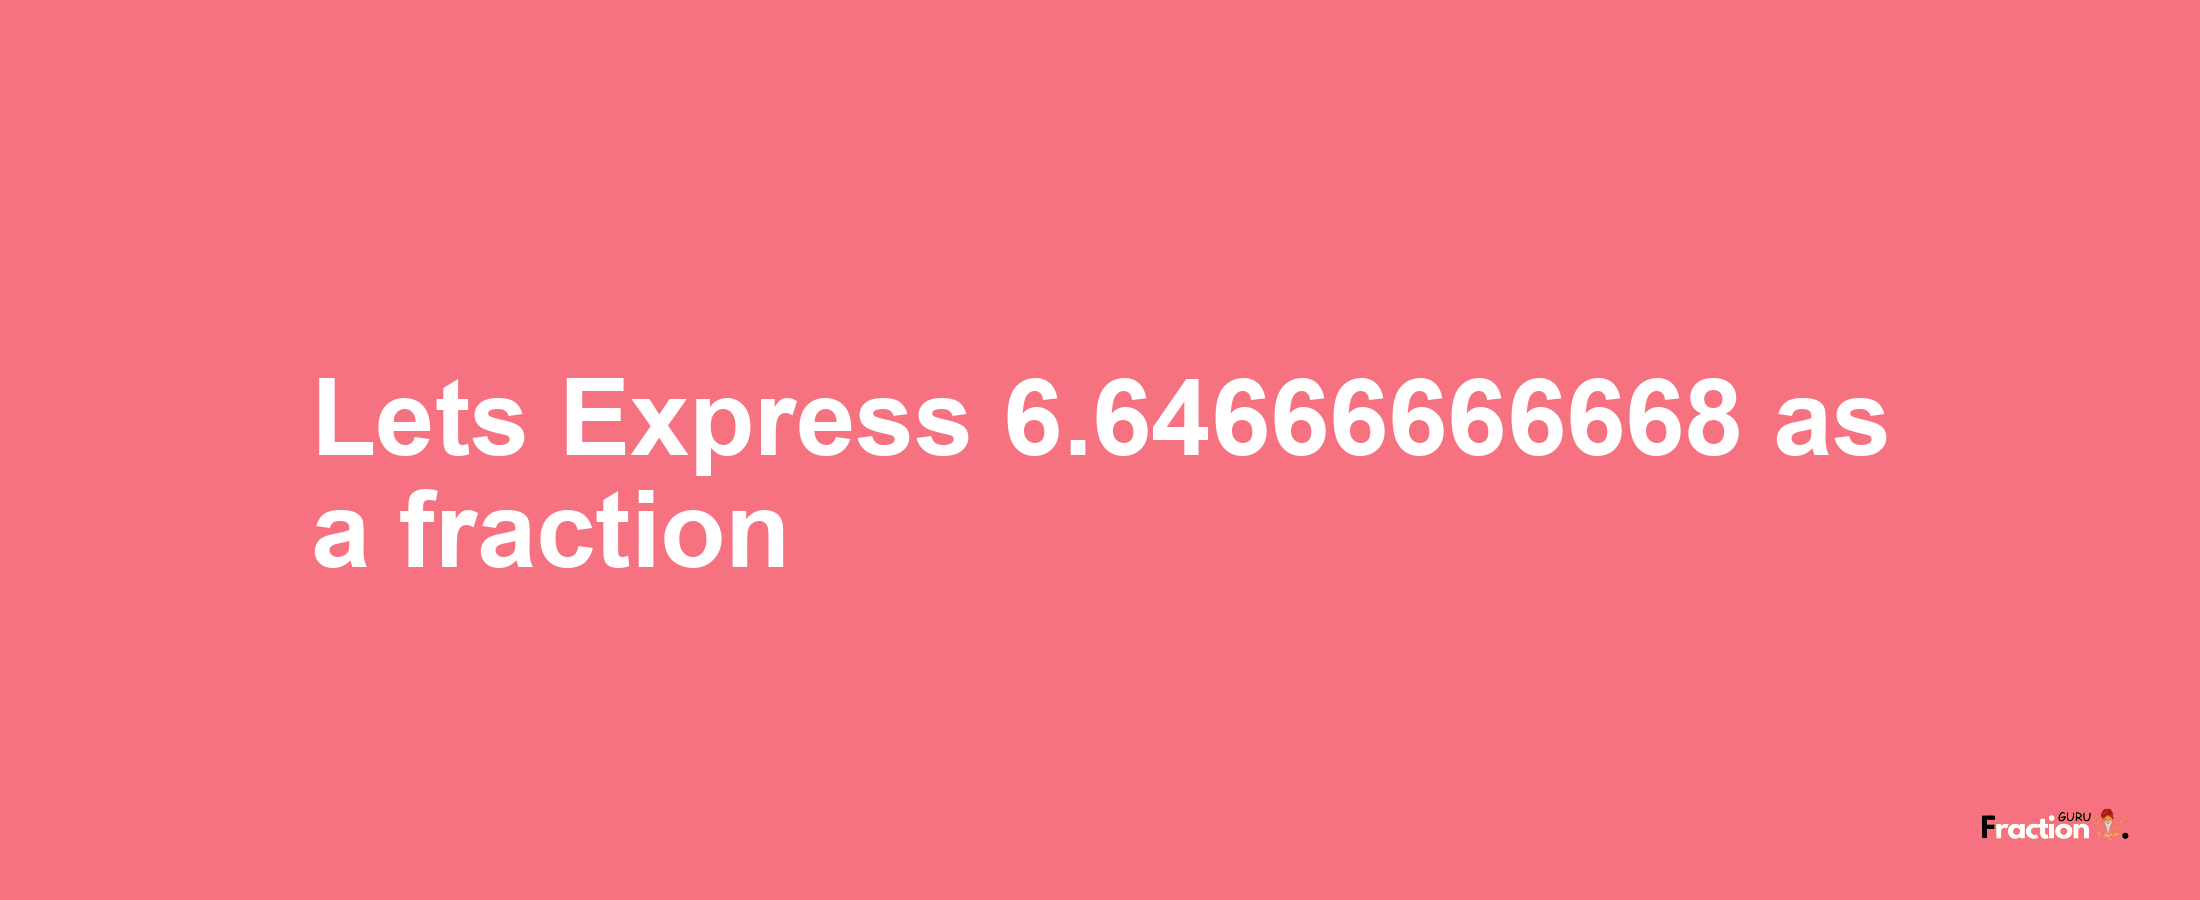 Lets Express 6.64666666668 as afraction